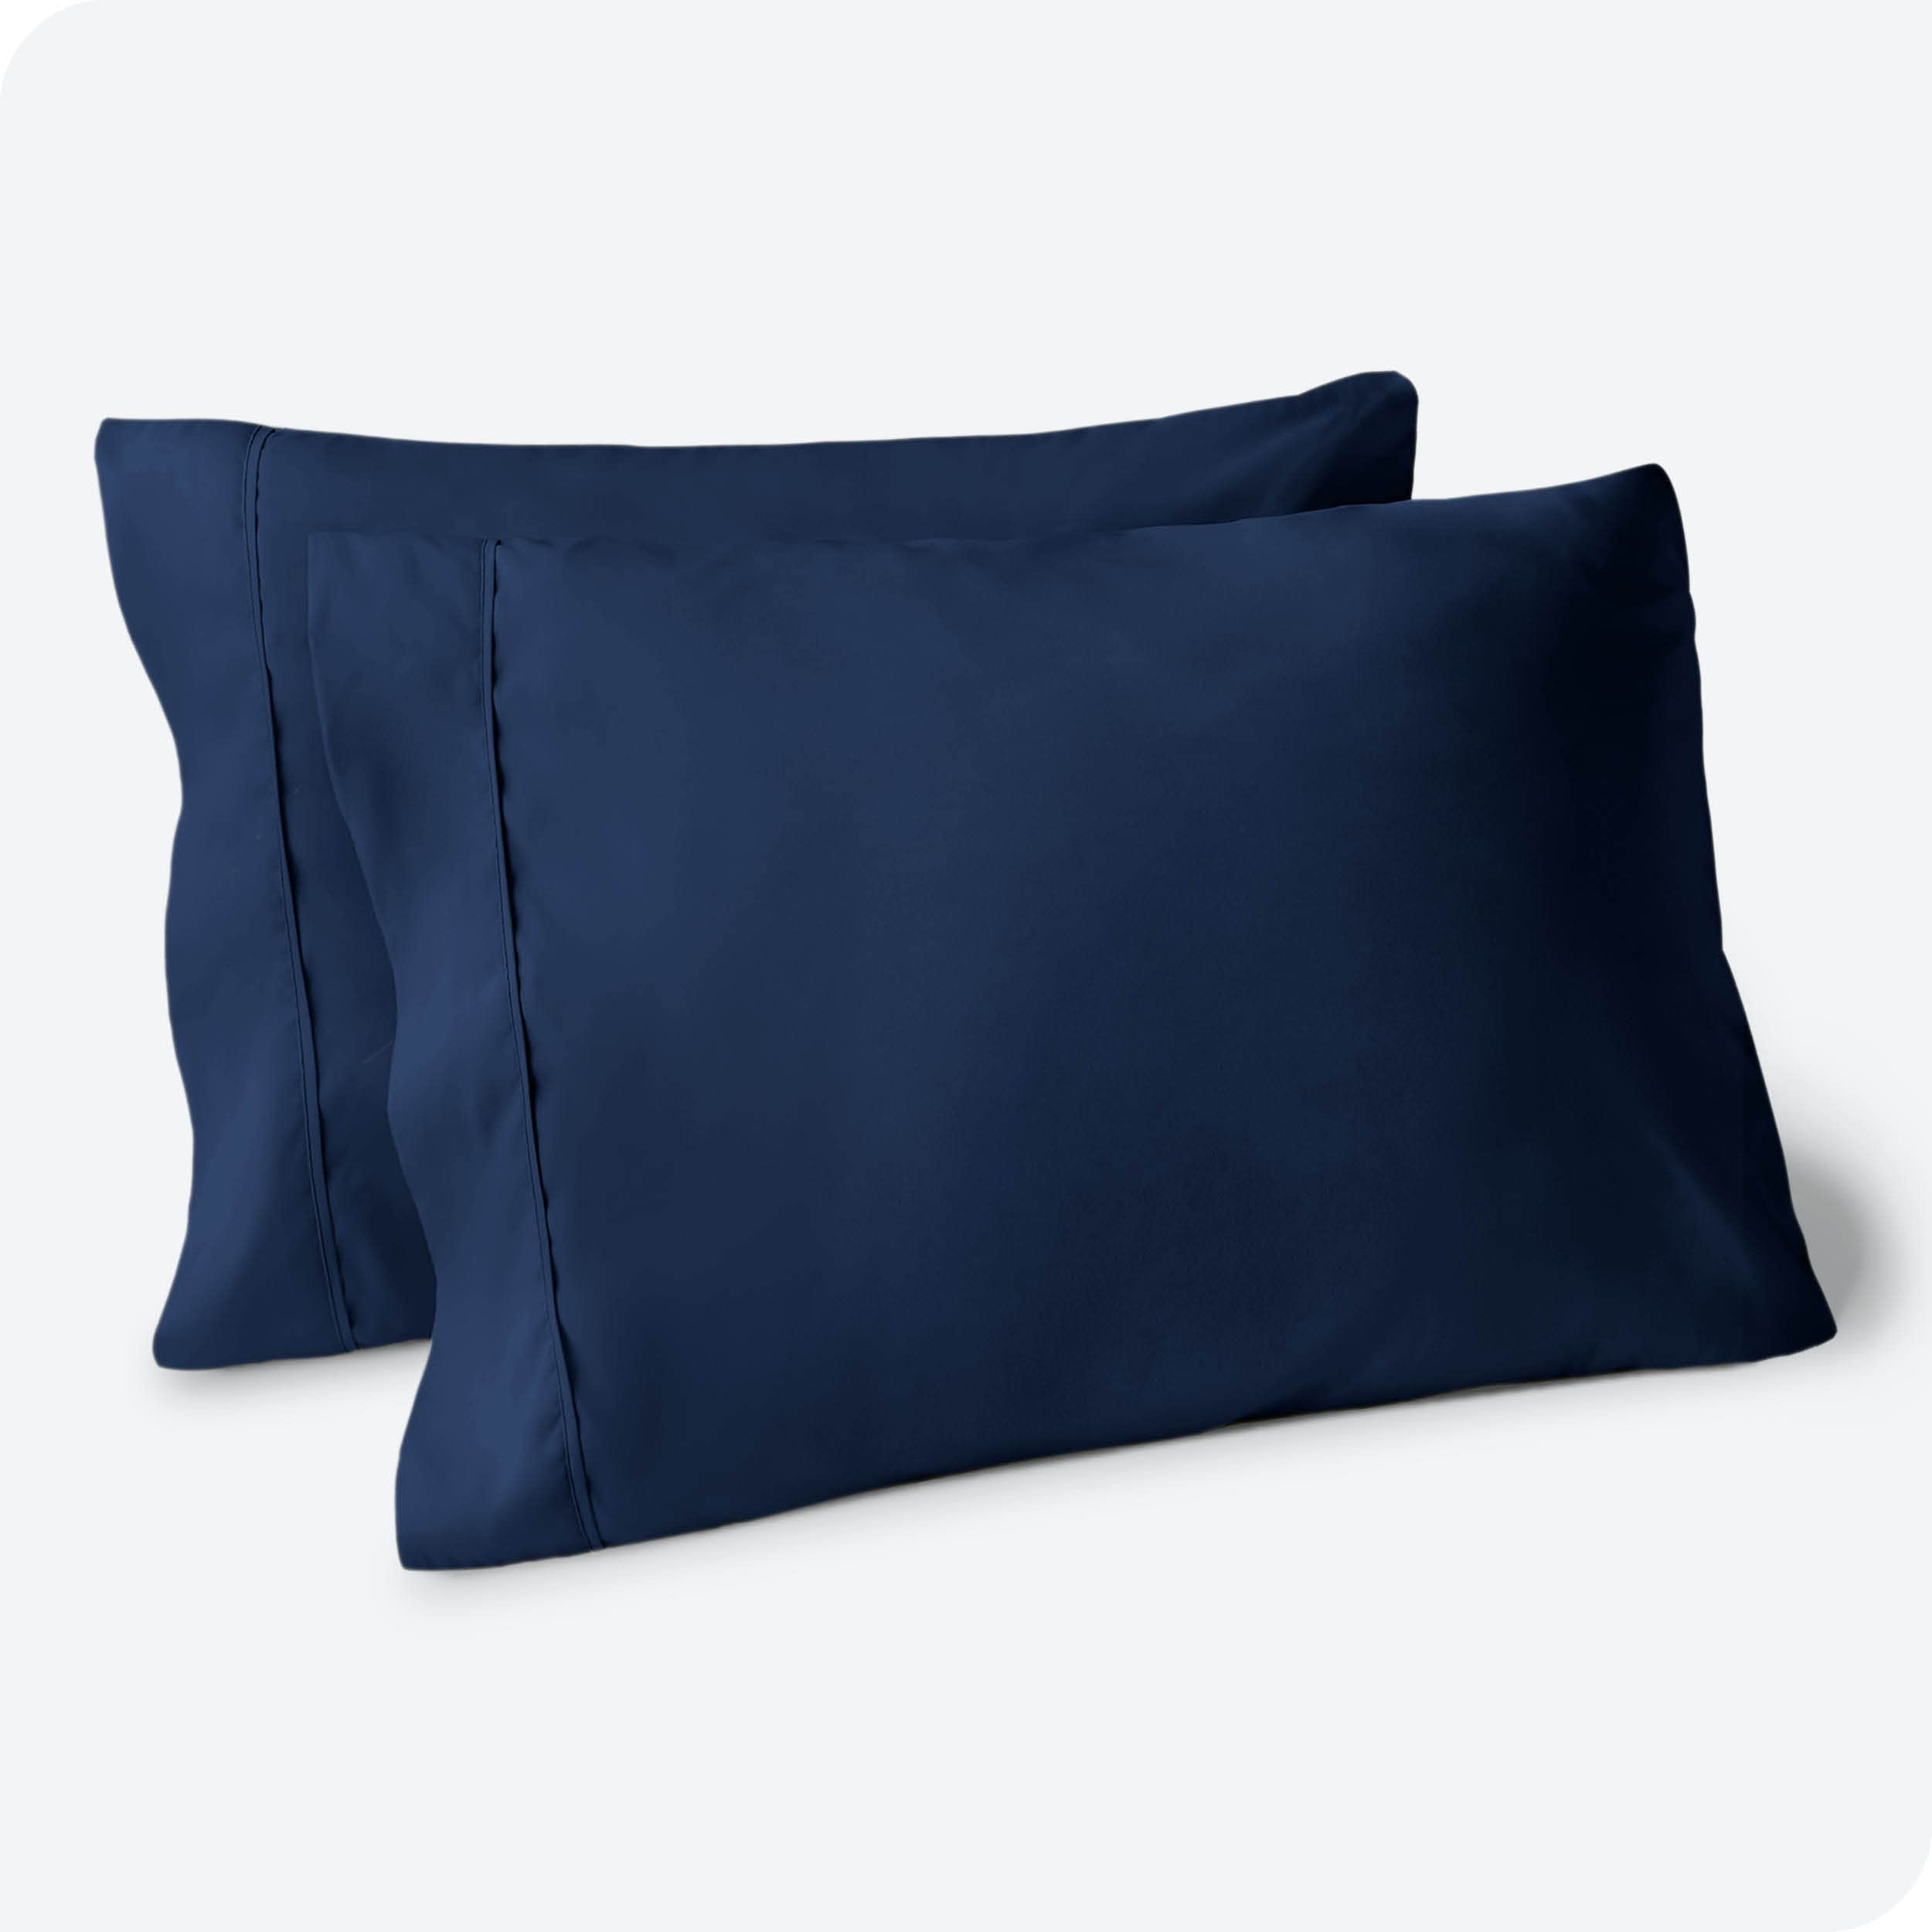 Book Cover Bare Home Microfiber Pillow Cases - Standard/Queen Size Set of 2 - Cooling Pillowcases - Double Brushed - Dark Blue Pillowcases 2 Pack - Easy Care (Standard Pillowcase Set of 2, Dark Blue) 20x30 Standard/Queen (2 Pack) 12 - Dark Blue